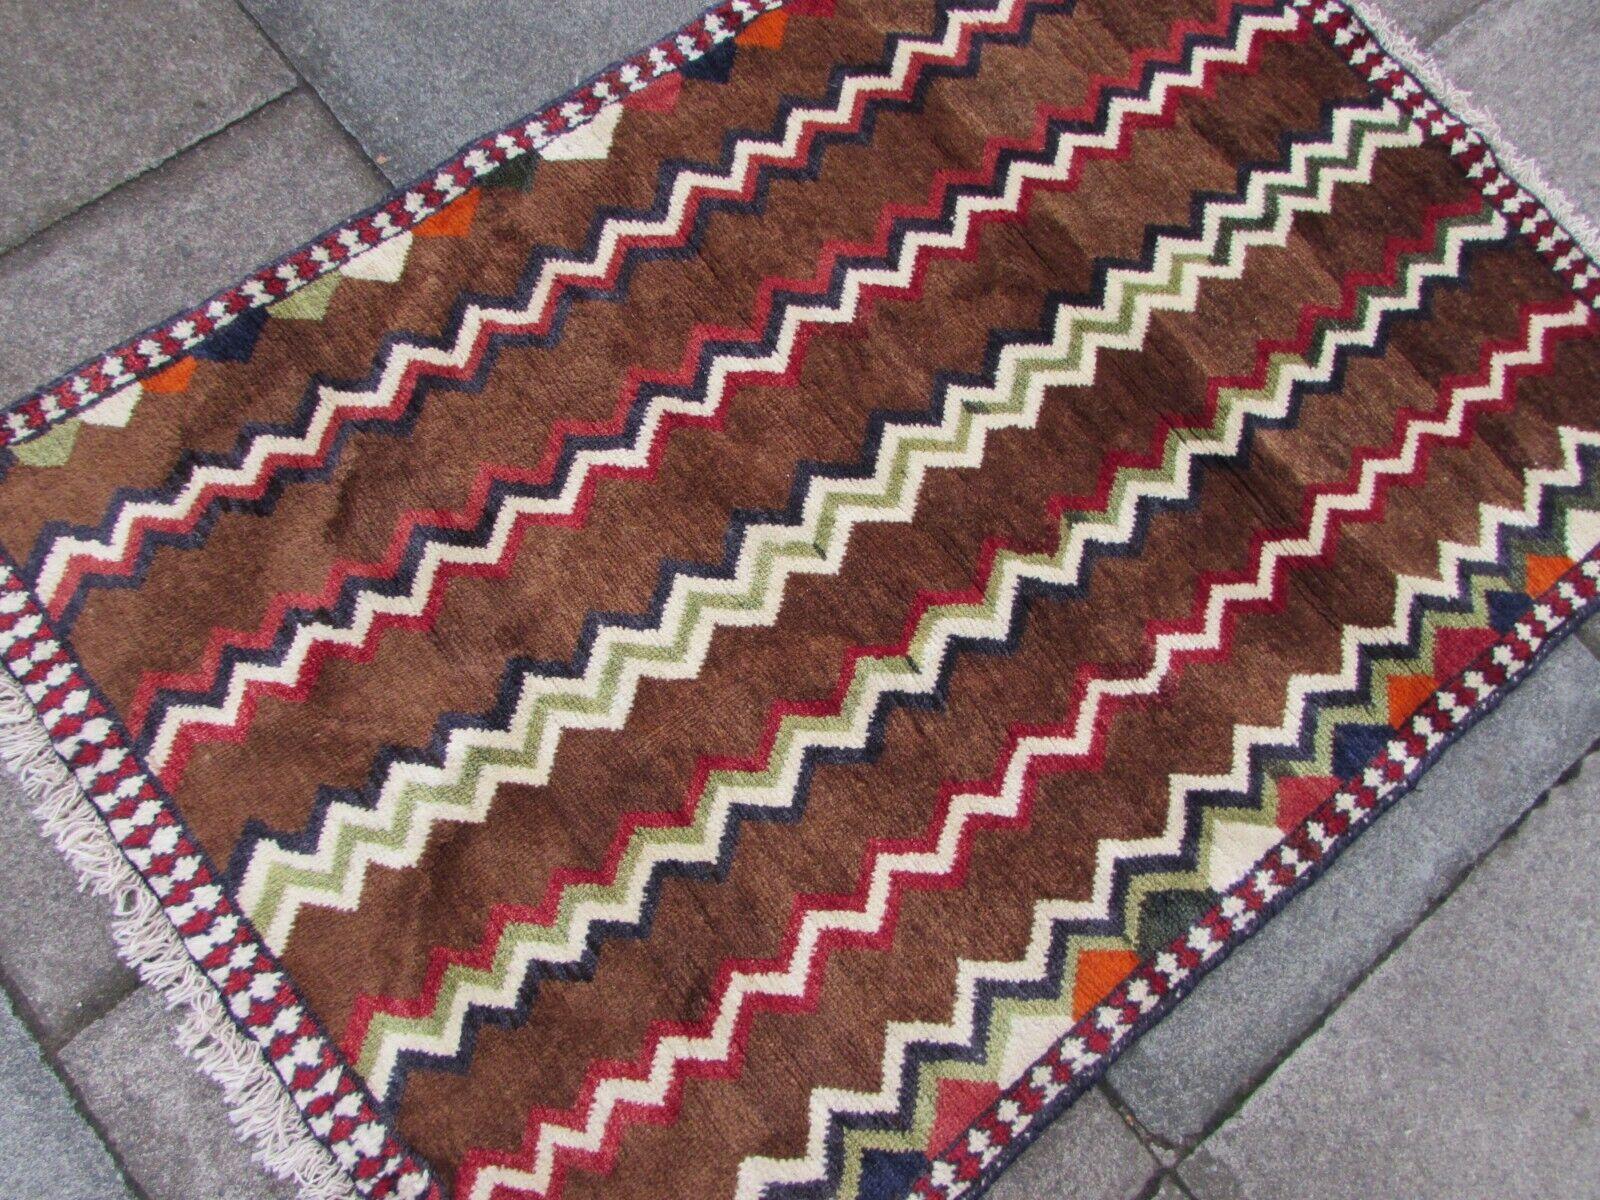 Handmade Vintage Persian Style Gabbeh Rug 3.1' x 4.5', 1970s - 1Q70 For Sale 3